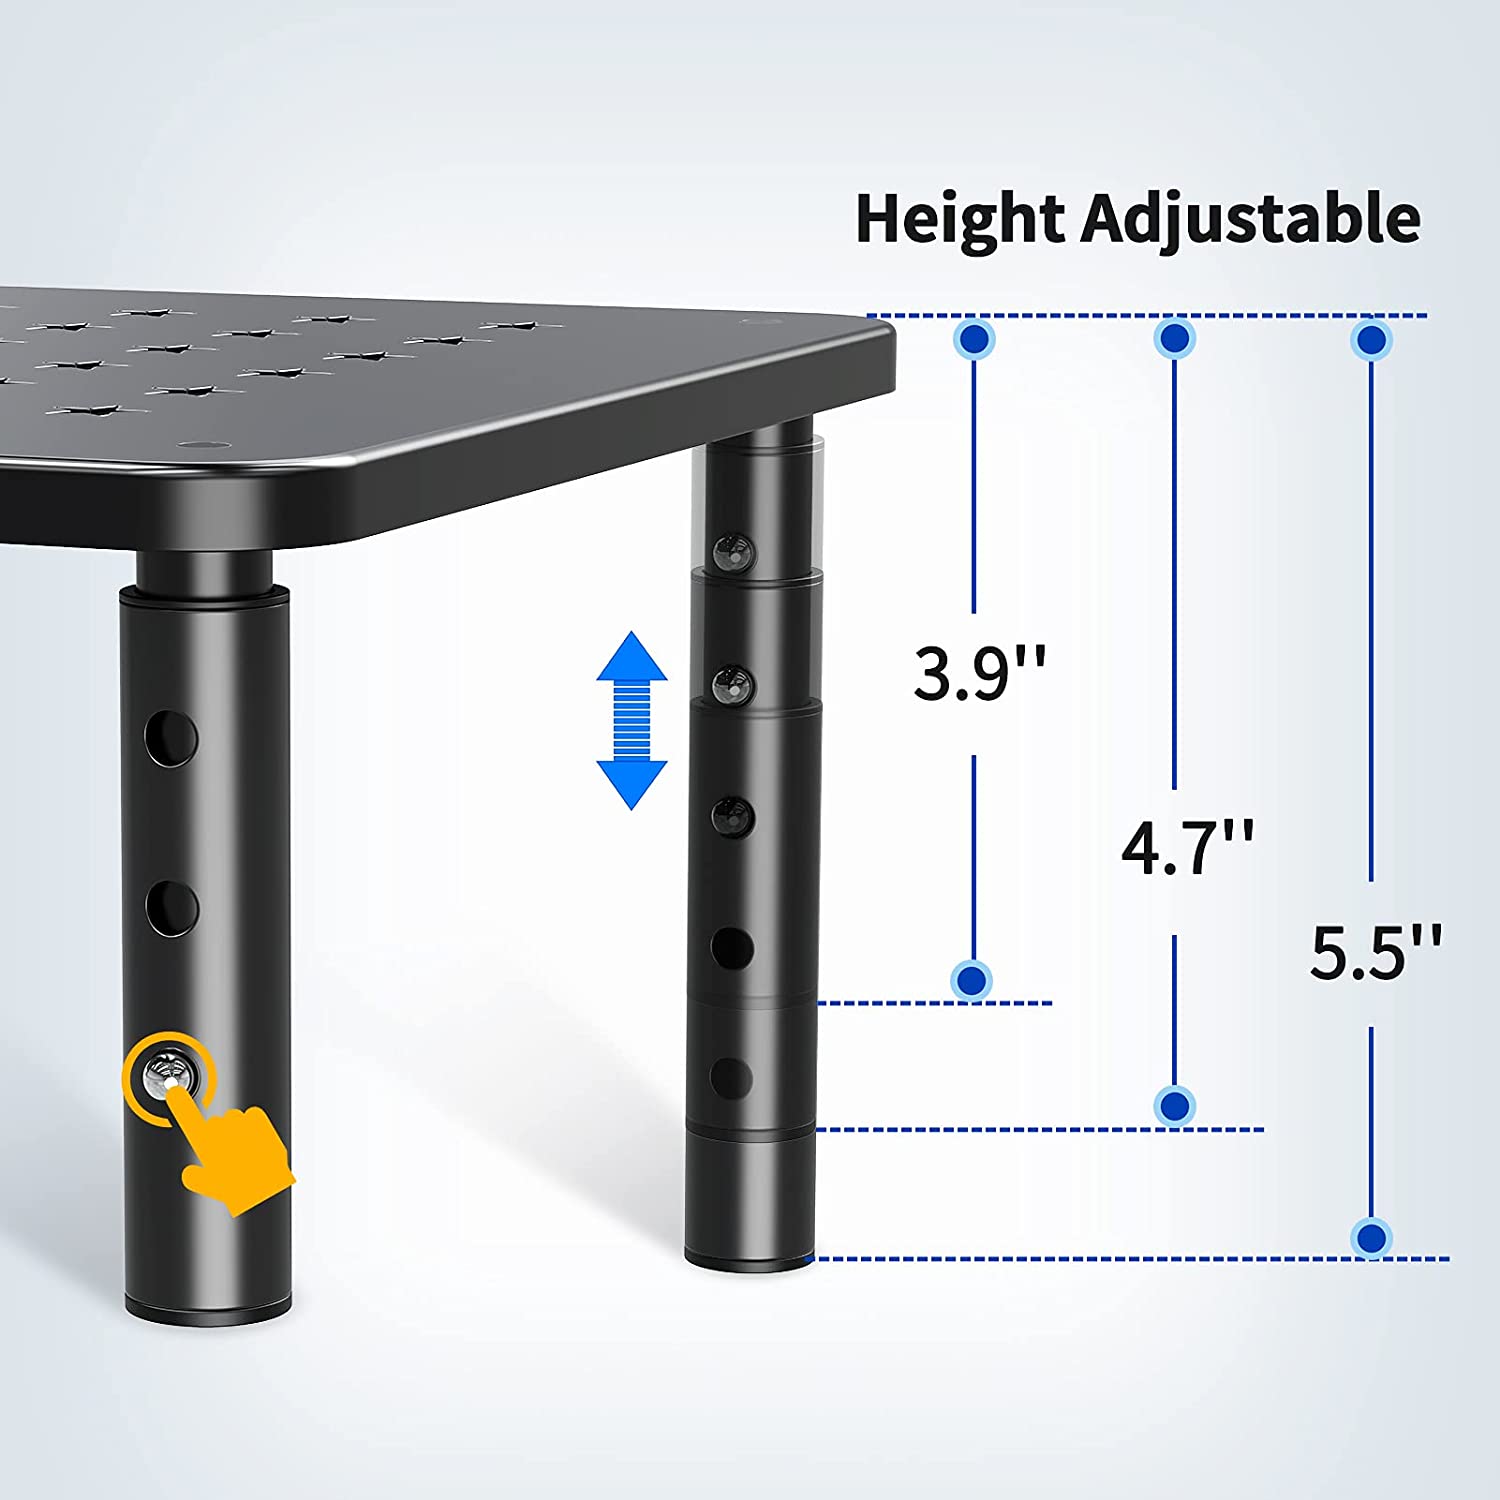 Zimilar 2 Pack Monitor Stand Riser - 3 Height Adjustable Monitor Stand with Star Ventilation Holes for Laptop, Computer, PC, Printer, Mesh Metal